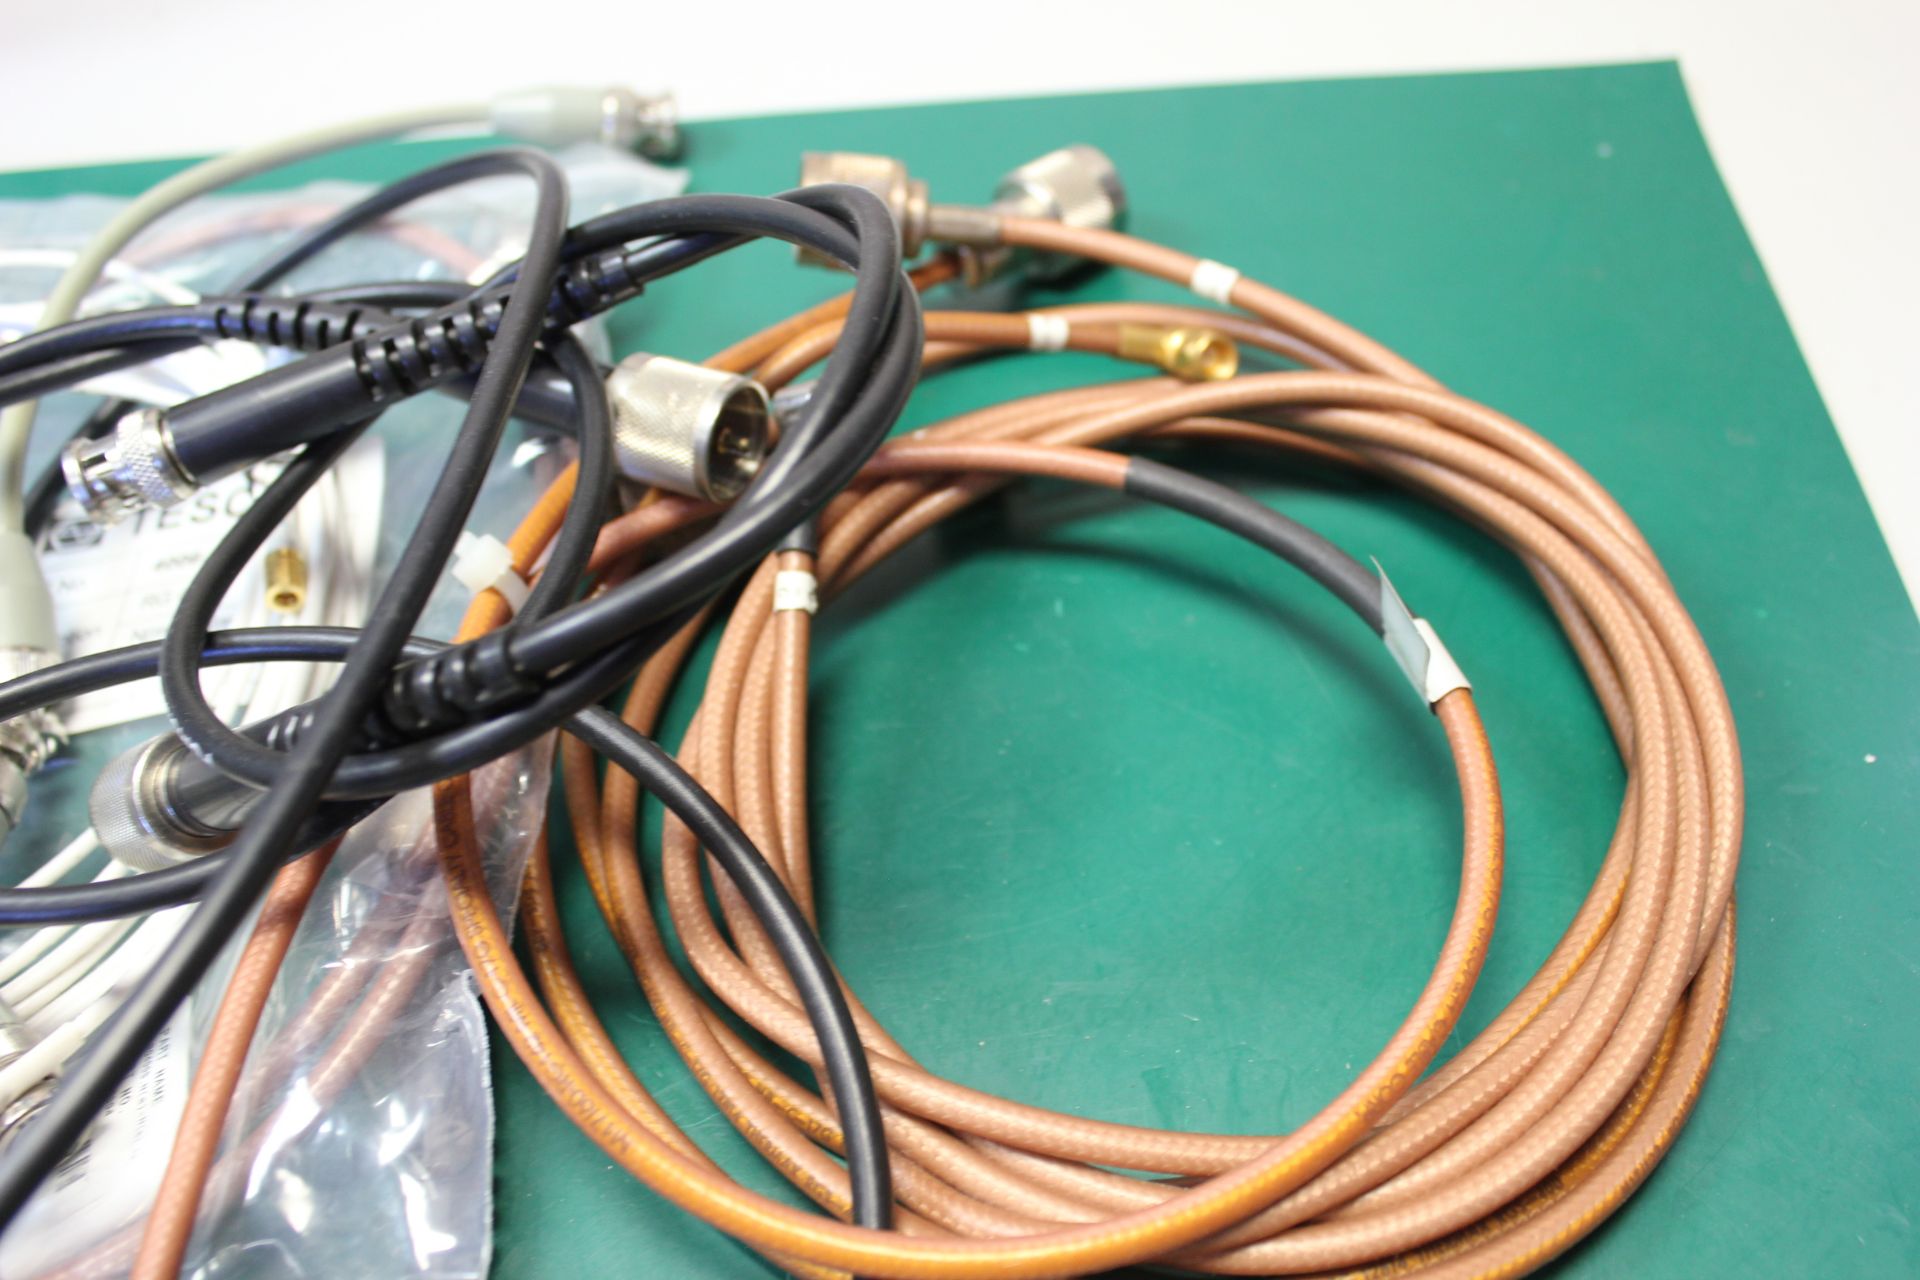 LOT OF RF MICROWAVE RF CABLES - Image 2 of 3